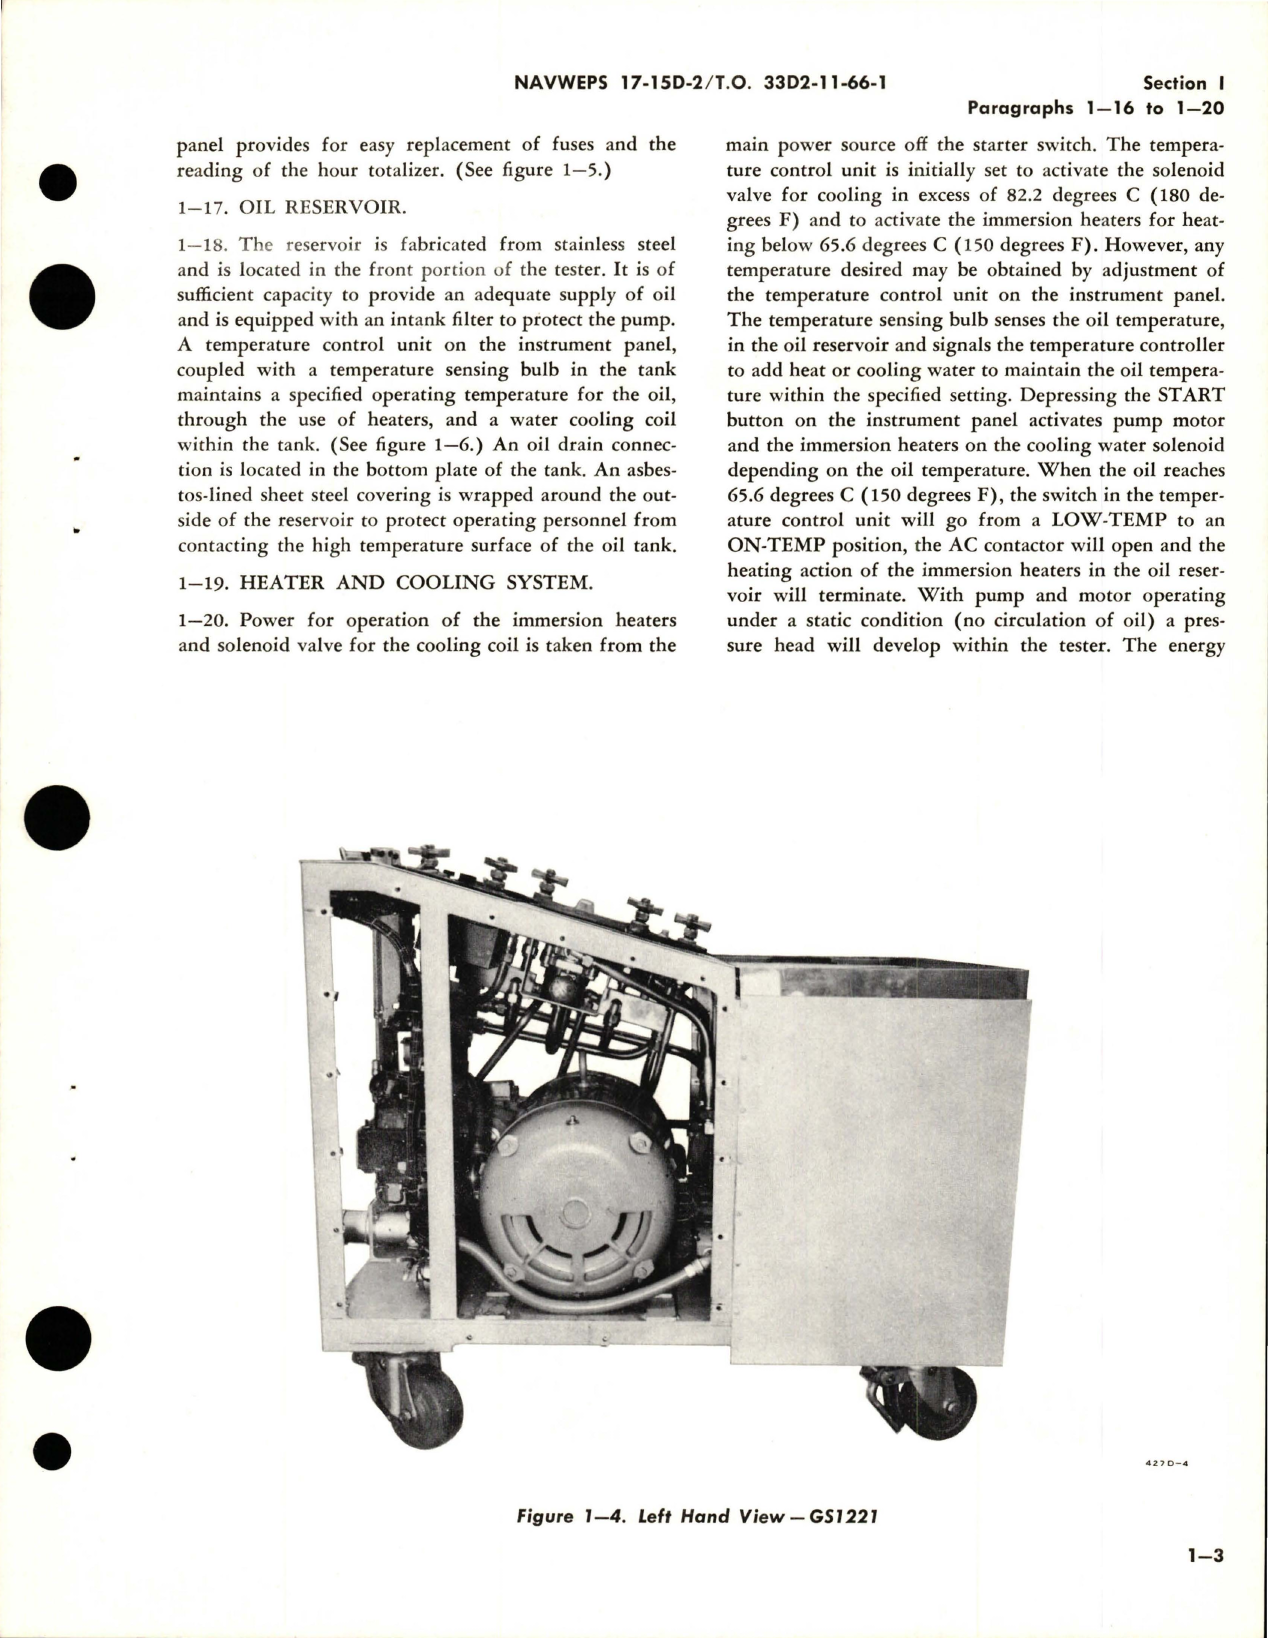 Sample page 7 from AirCorps Library document: Operation, Service Instructions and Illustrated Parts Breakdown for Hydraulic Propeller Testing 